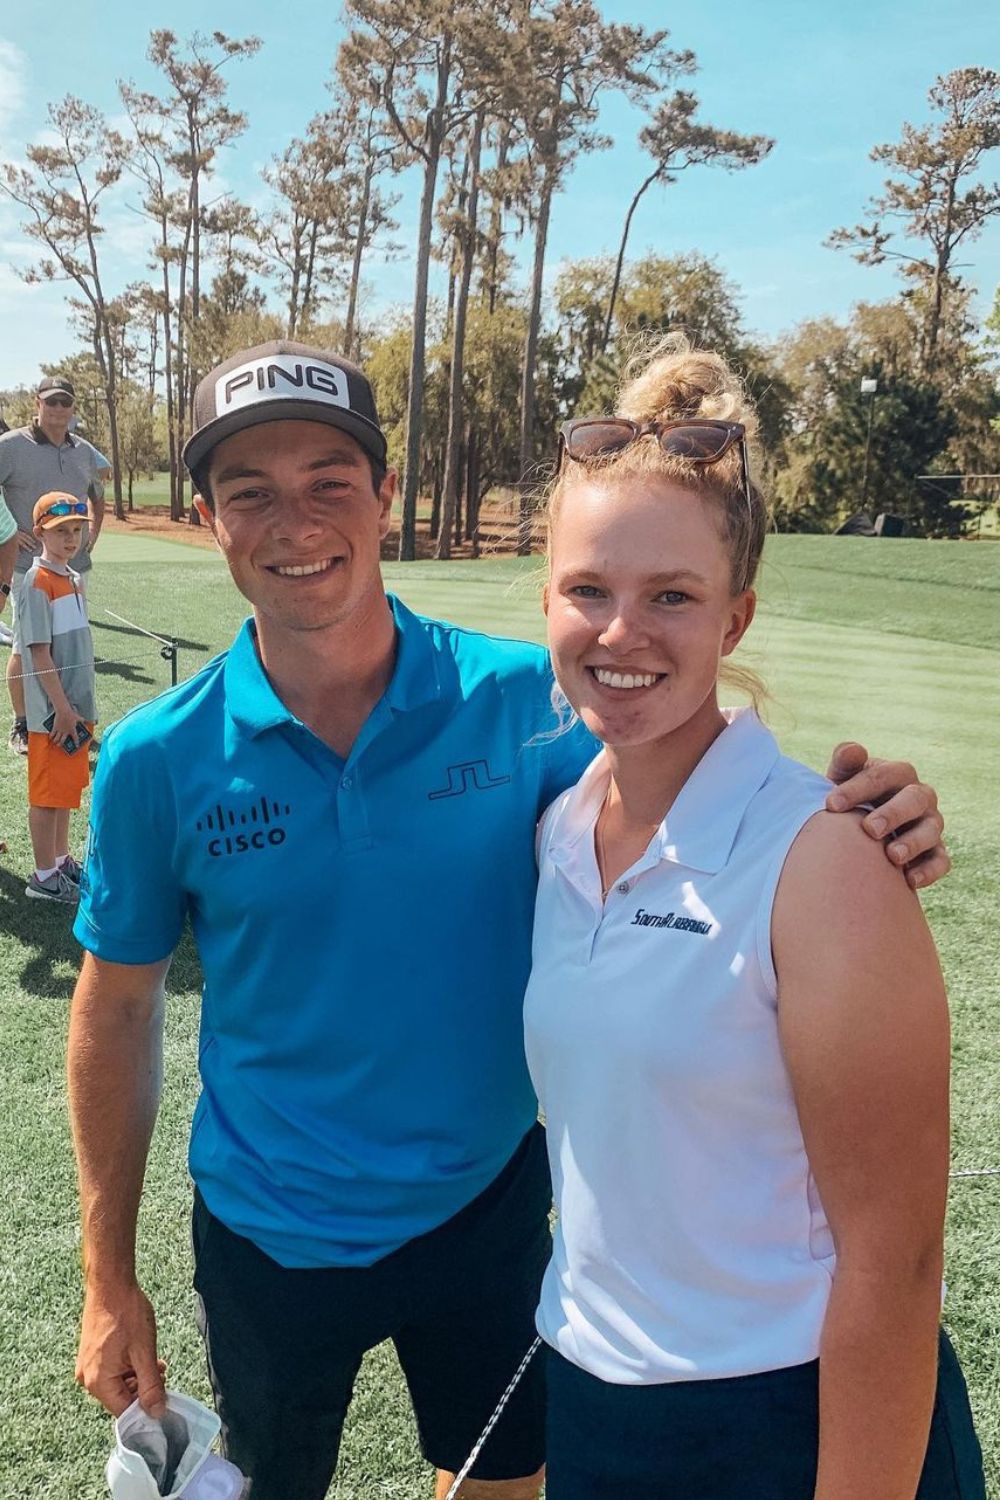 Viktor Hovland Sister Julie Hovland Is Also A Golfer What About His